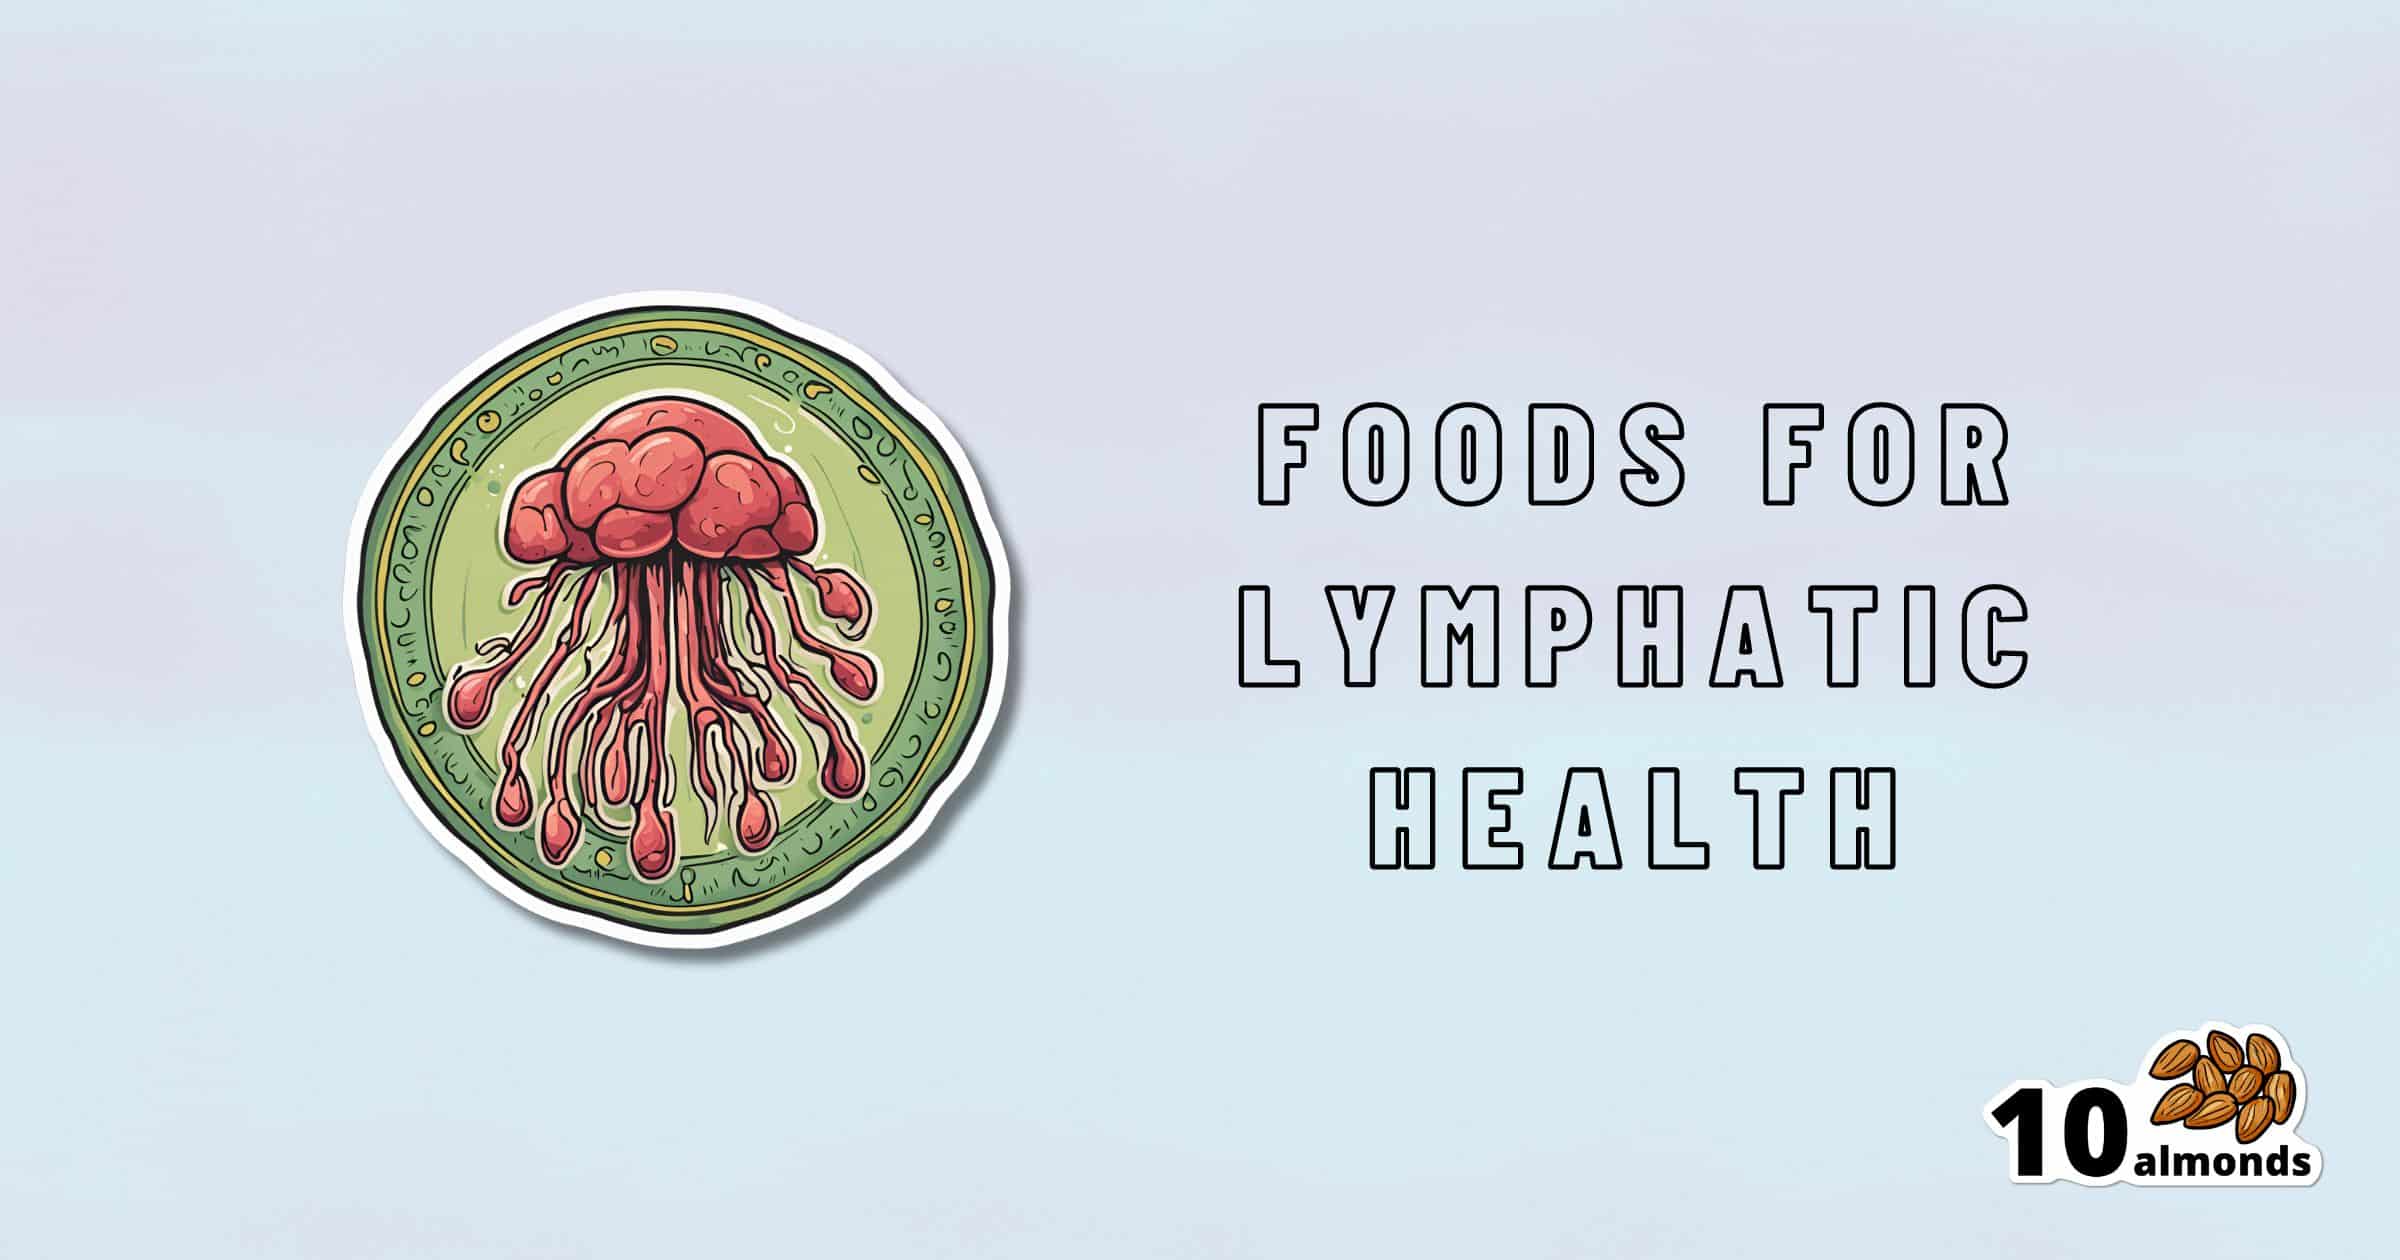 An illustration of a jellyfish on a circular green background is positioned on the left side. Text on the right reads "Foods for Lymphatic Health and Lymph Flow." A small image of 10 almonds with accompanying text is at the bottom right. The background is light blue.